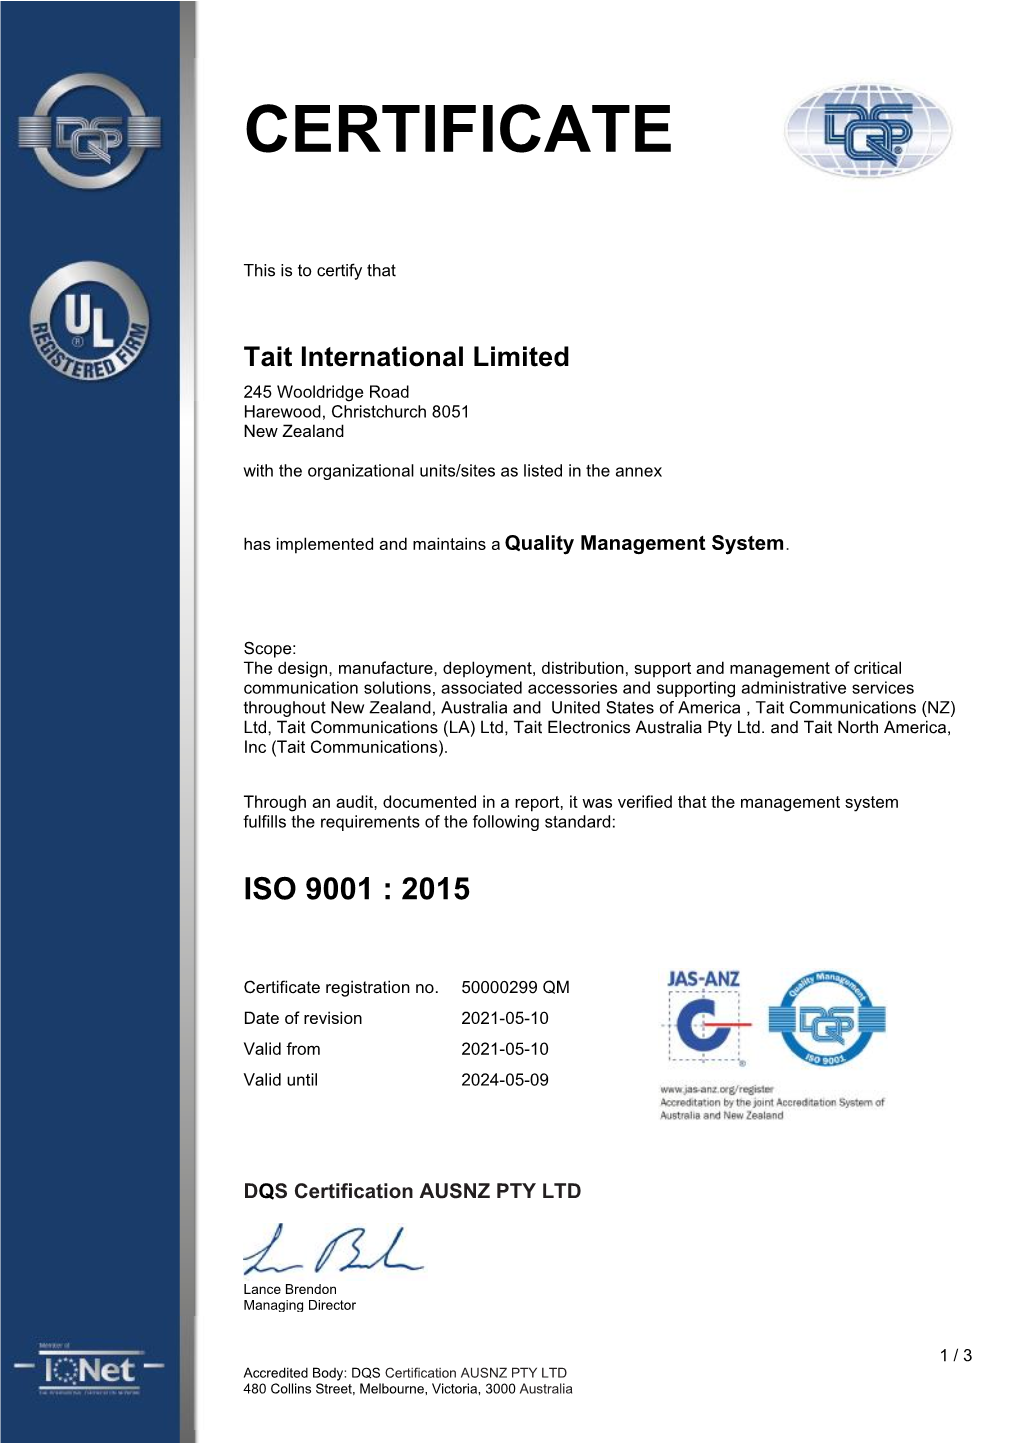 Tait International Limited ISO 9001 Certificate